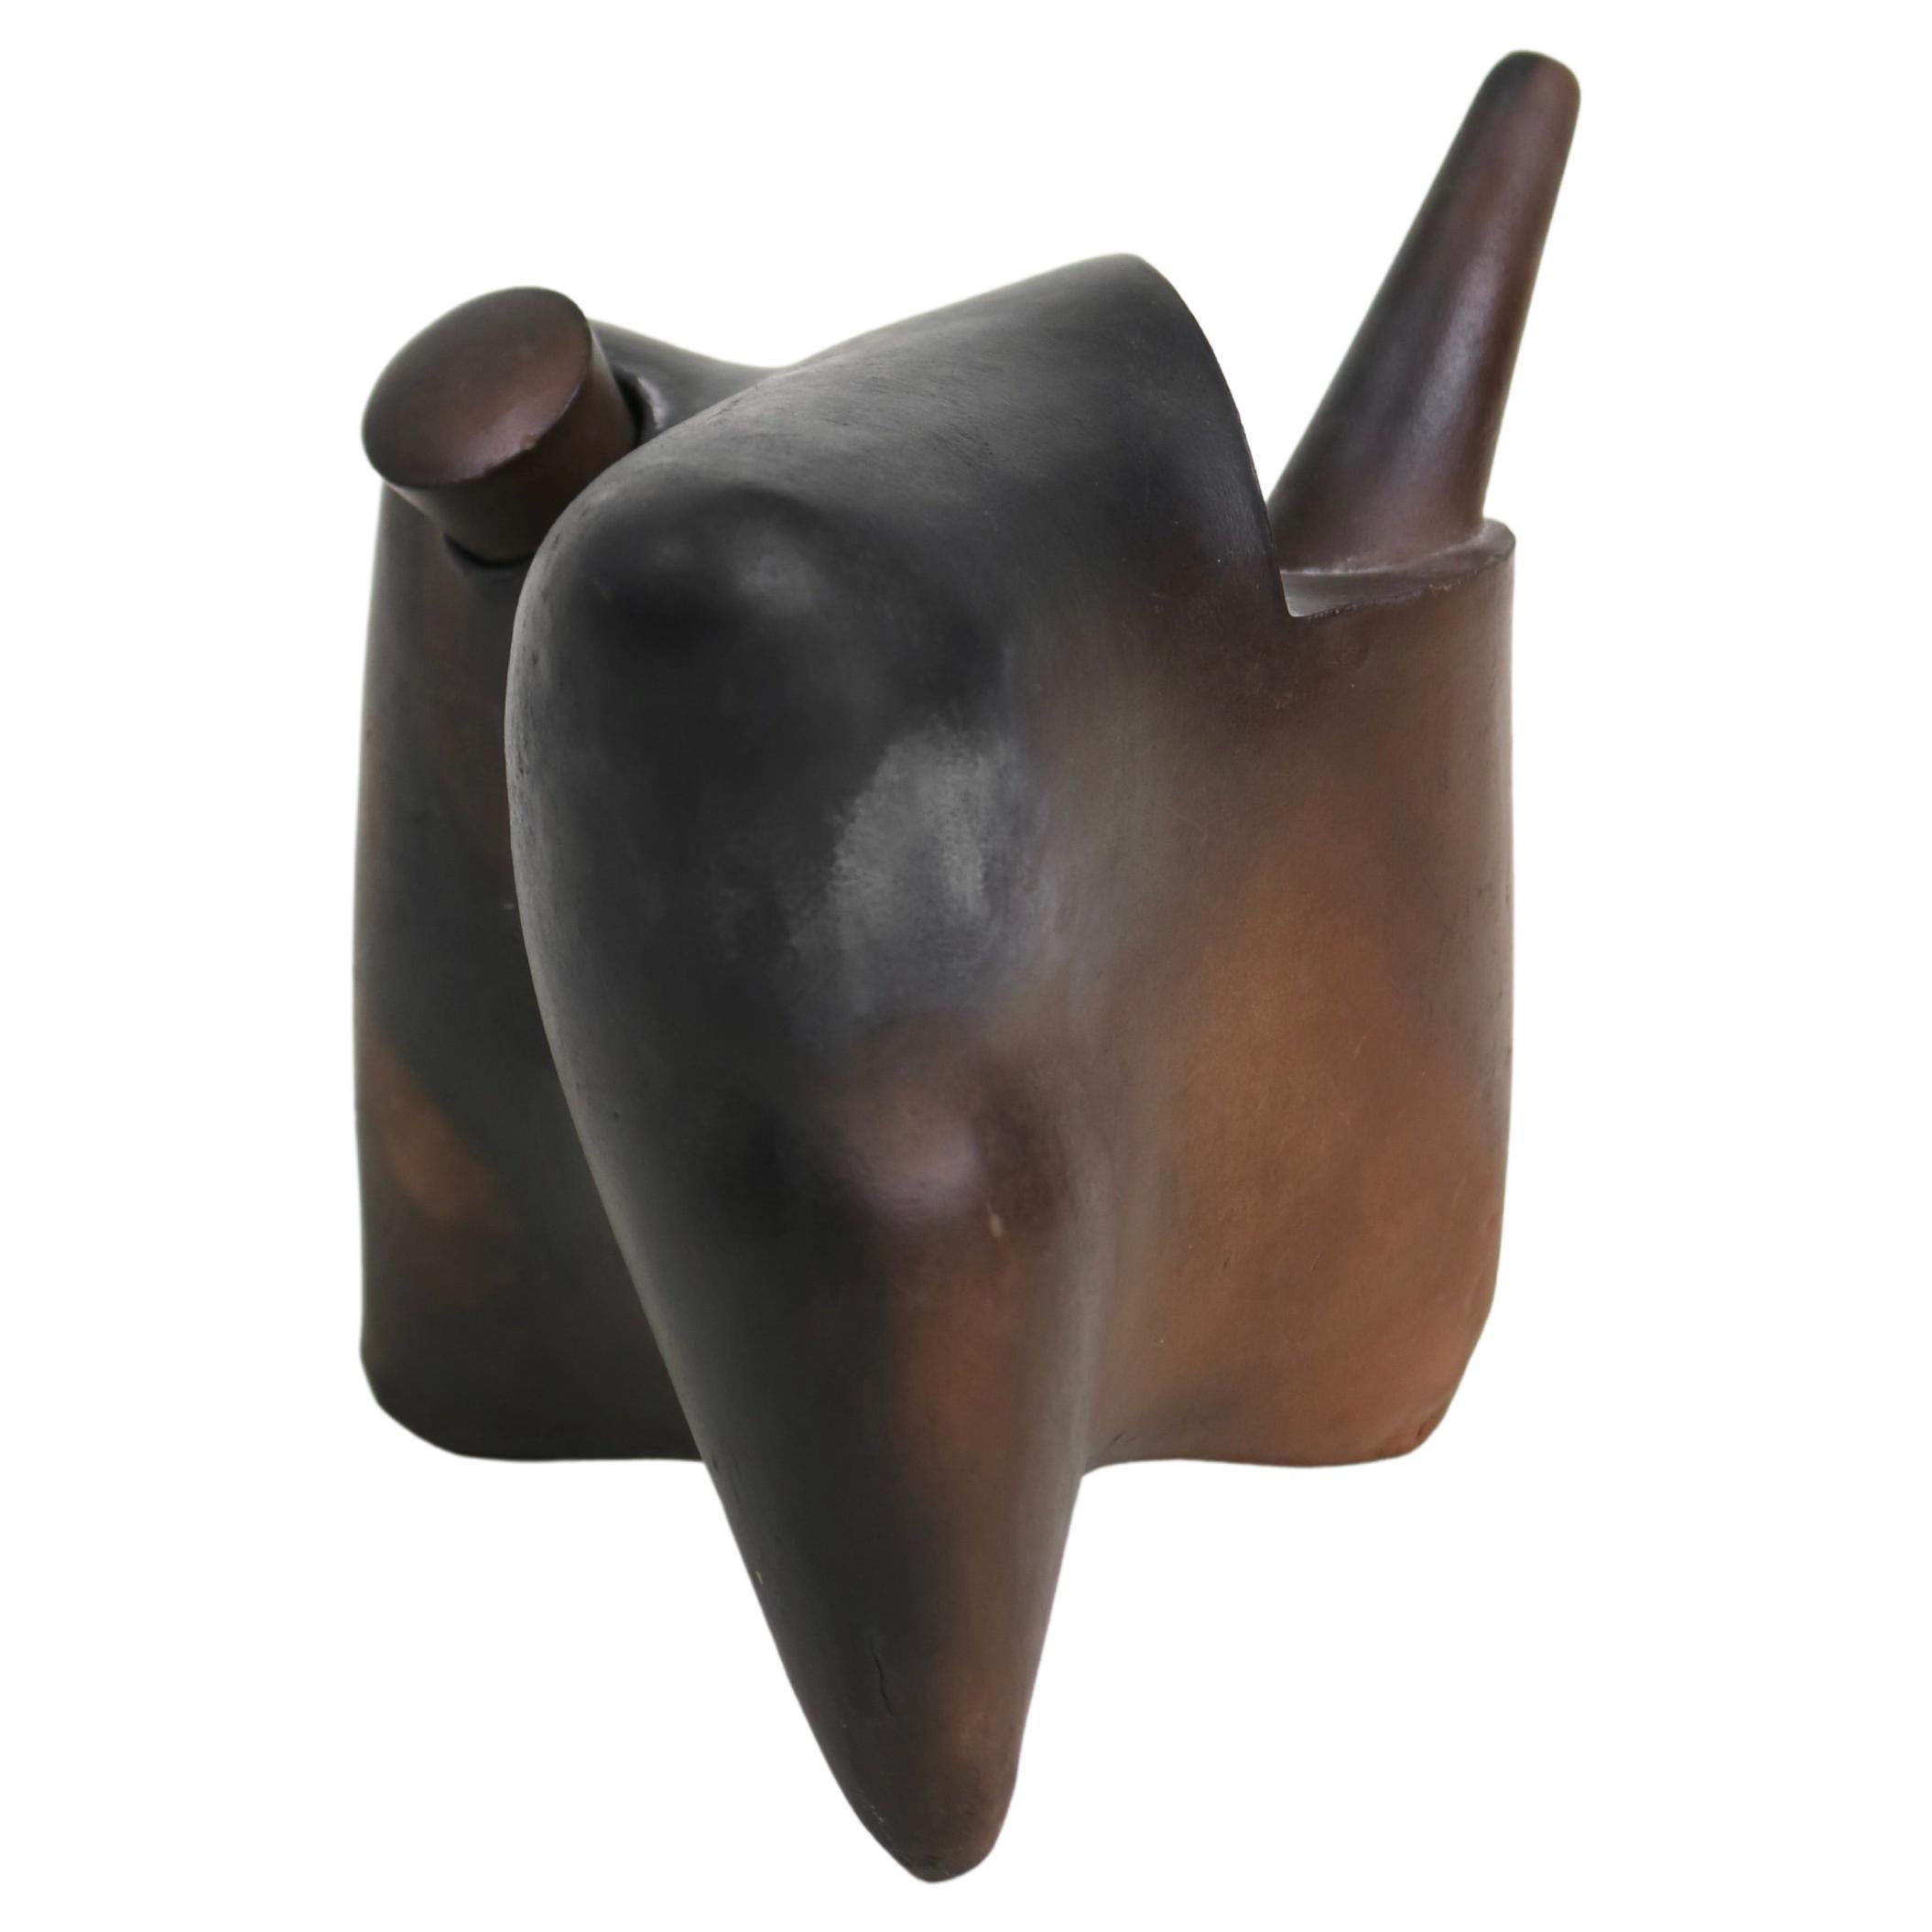 A sculptural ceramic 'Wine Pot' made in the 1990s by Danish potter Ann Linnemann. The piece has been hand-thrown, altered and pit-fired.

Linnemann worked from her Copenhagen studio and gallery until recently.
 